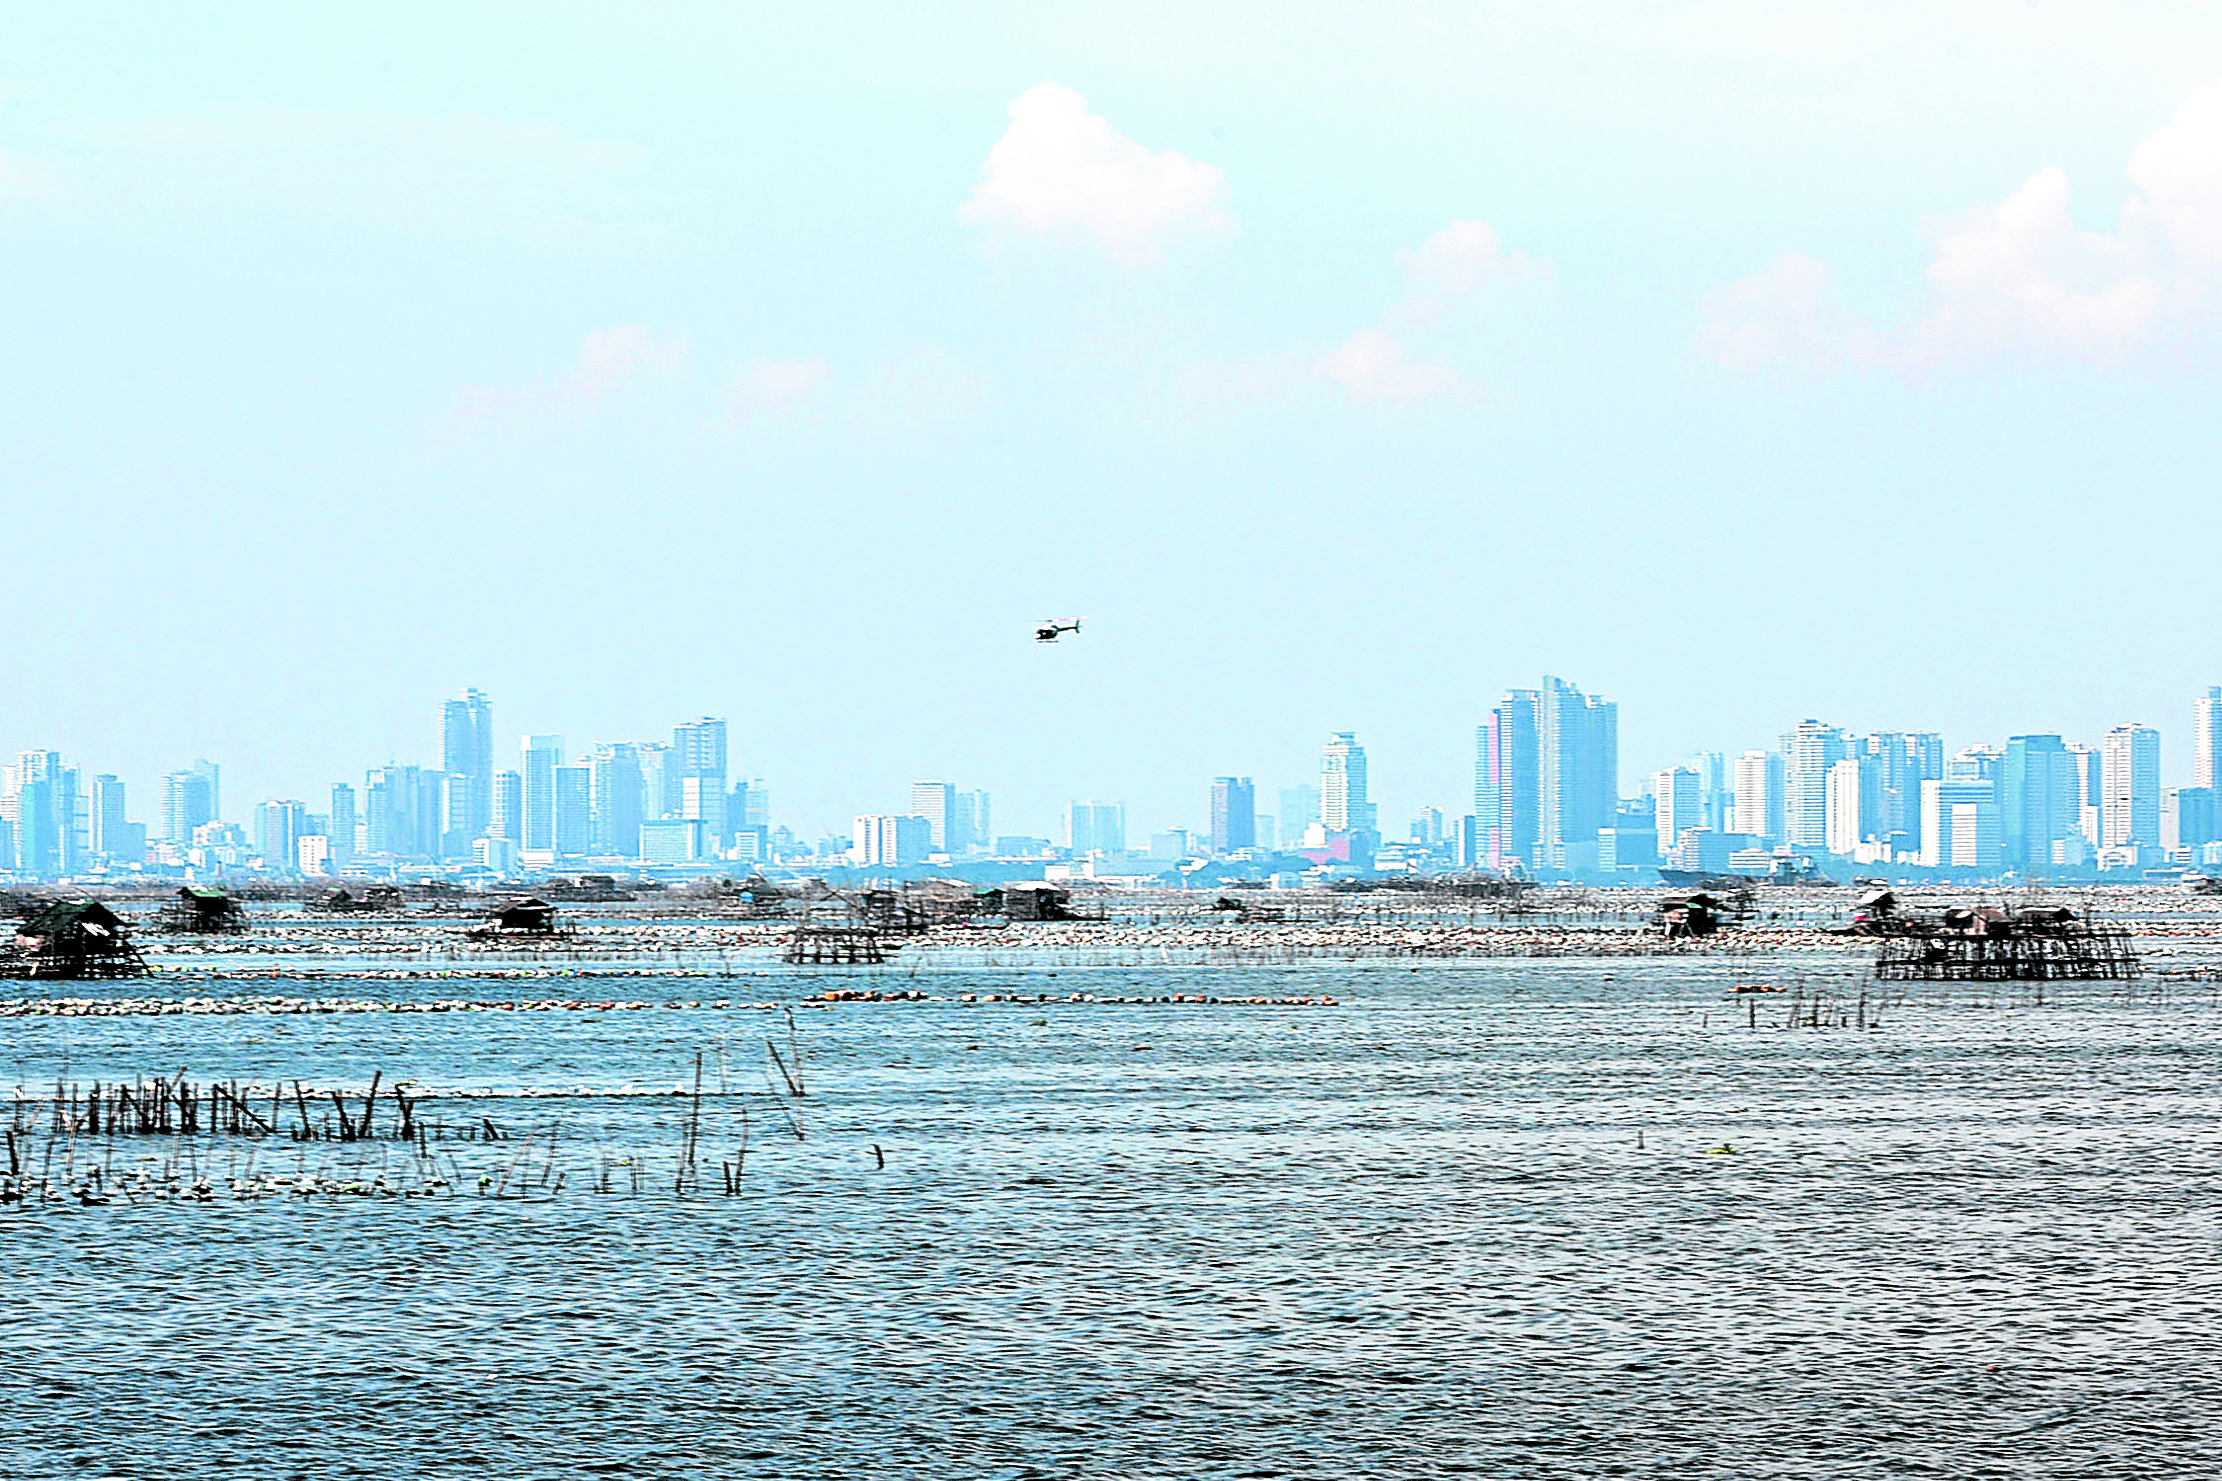 LESS DIRTY Although not yet fit for swimming, government efforts to rehabilitate Manila Bay appear to be paying off. —INQUIRER FILE PHOTO